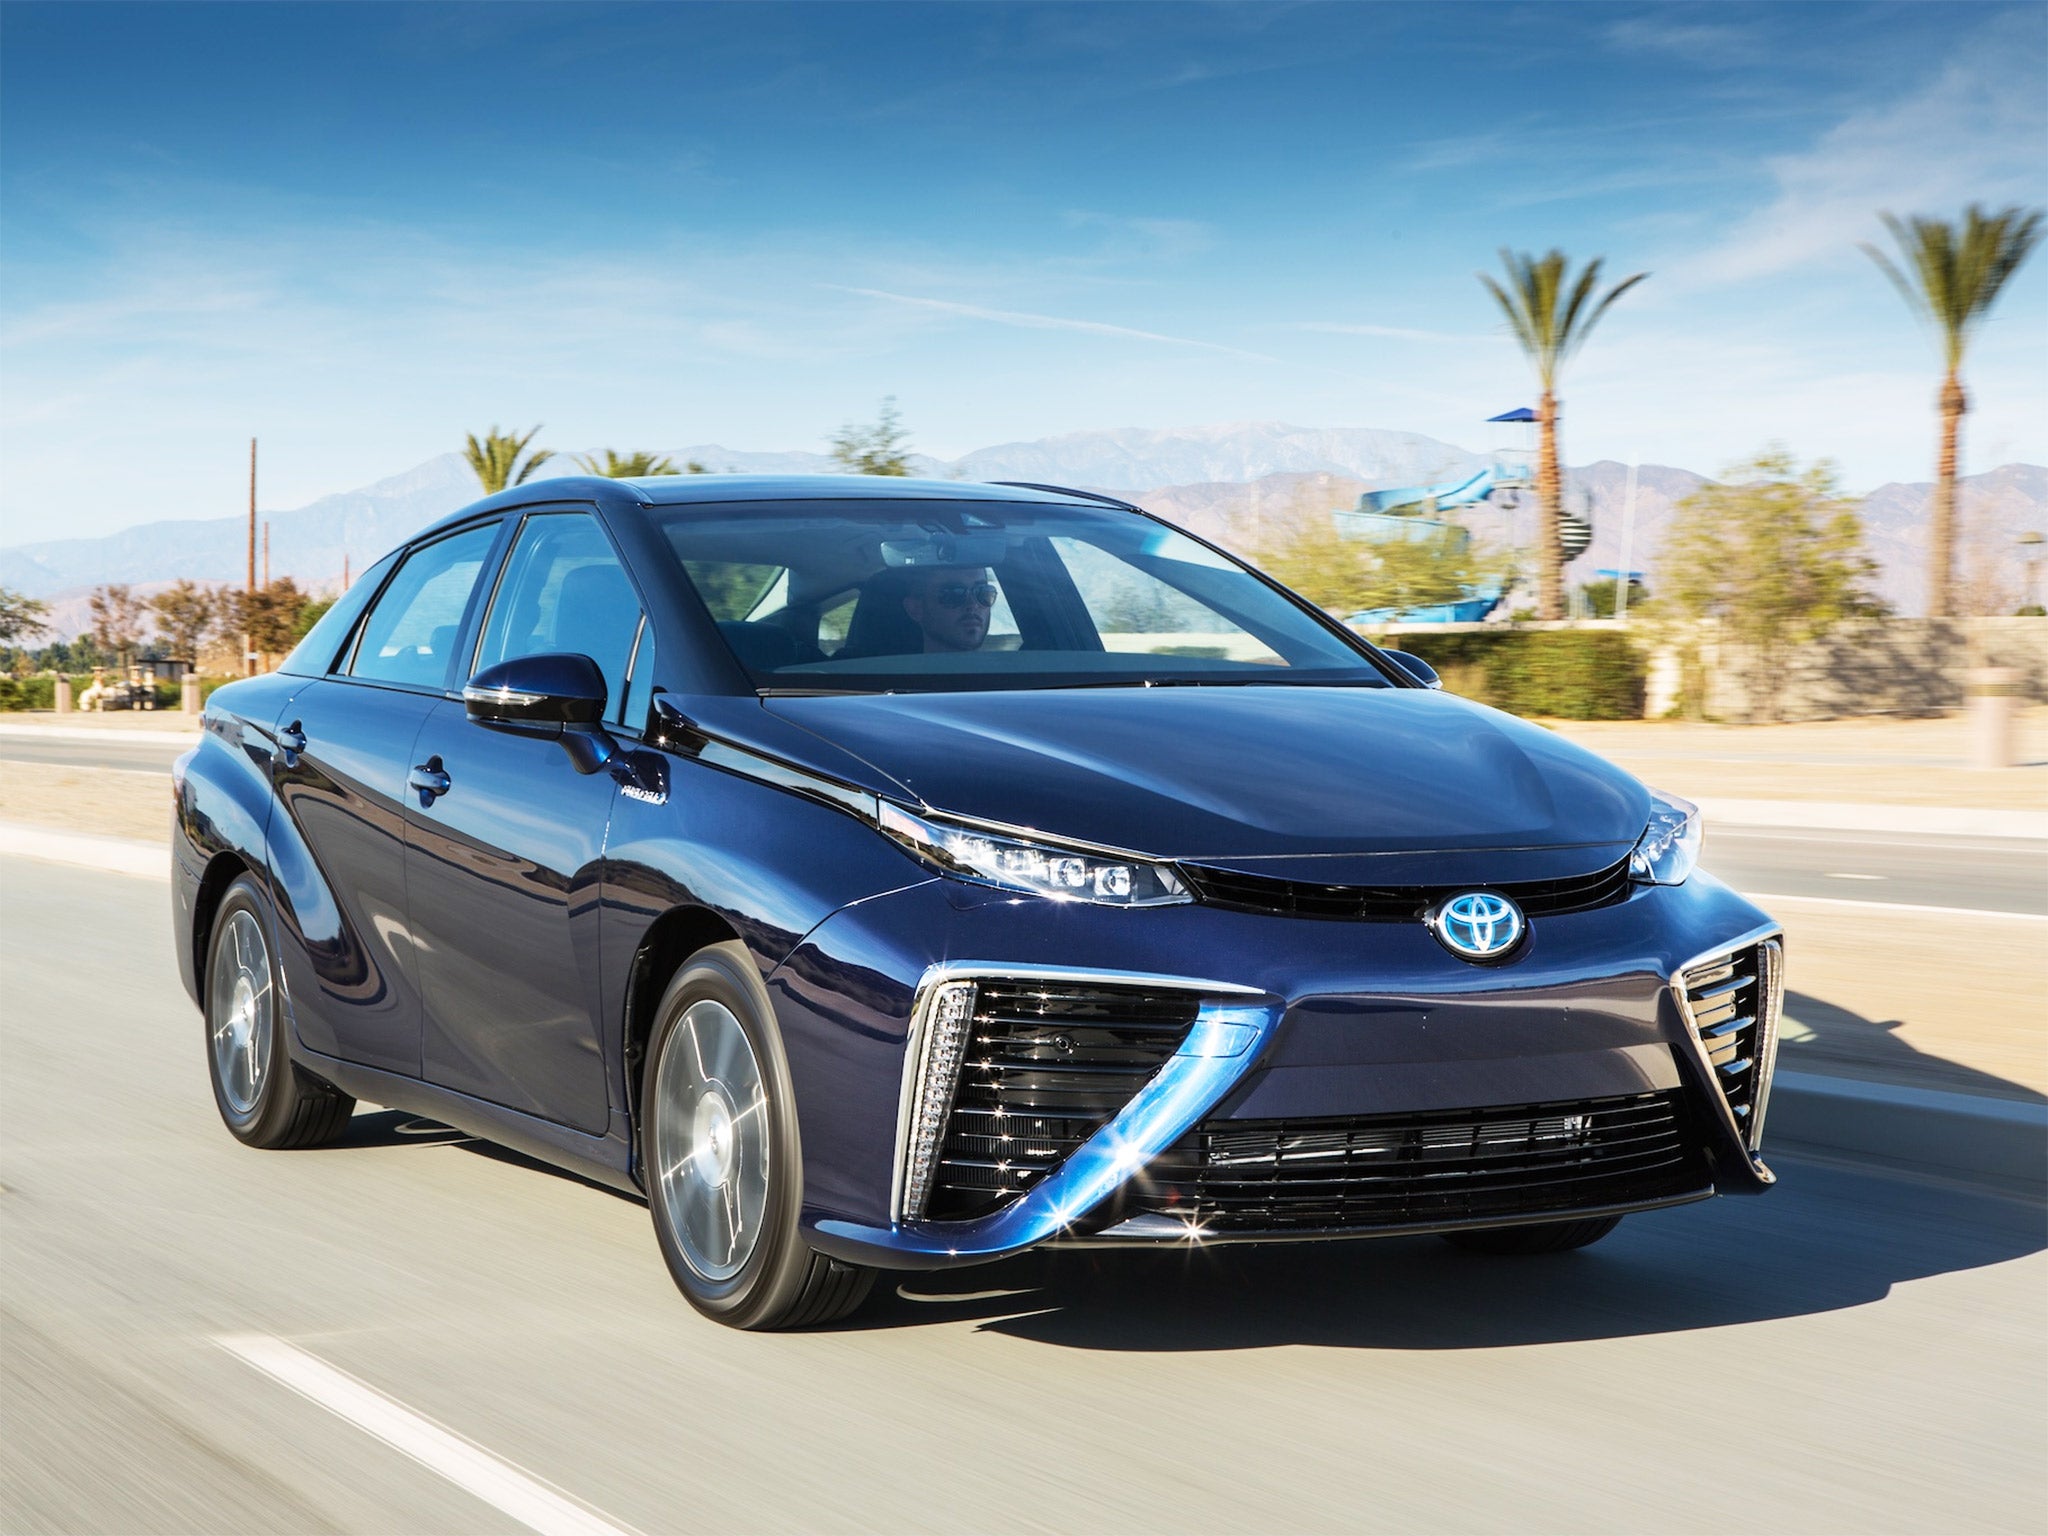 The new Toyota Mirai can be refuelled in just five minutes